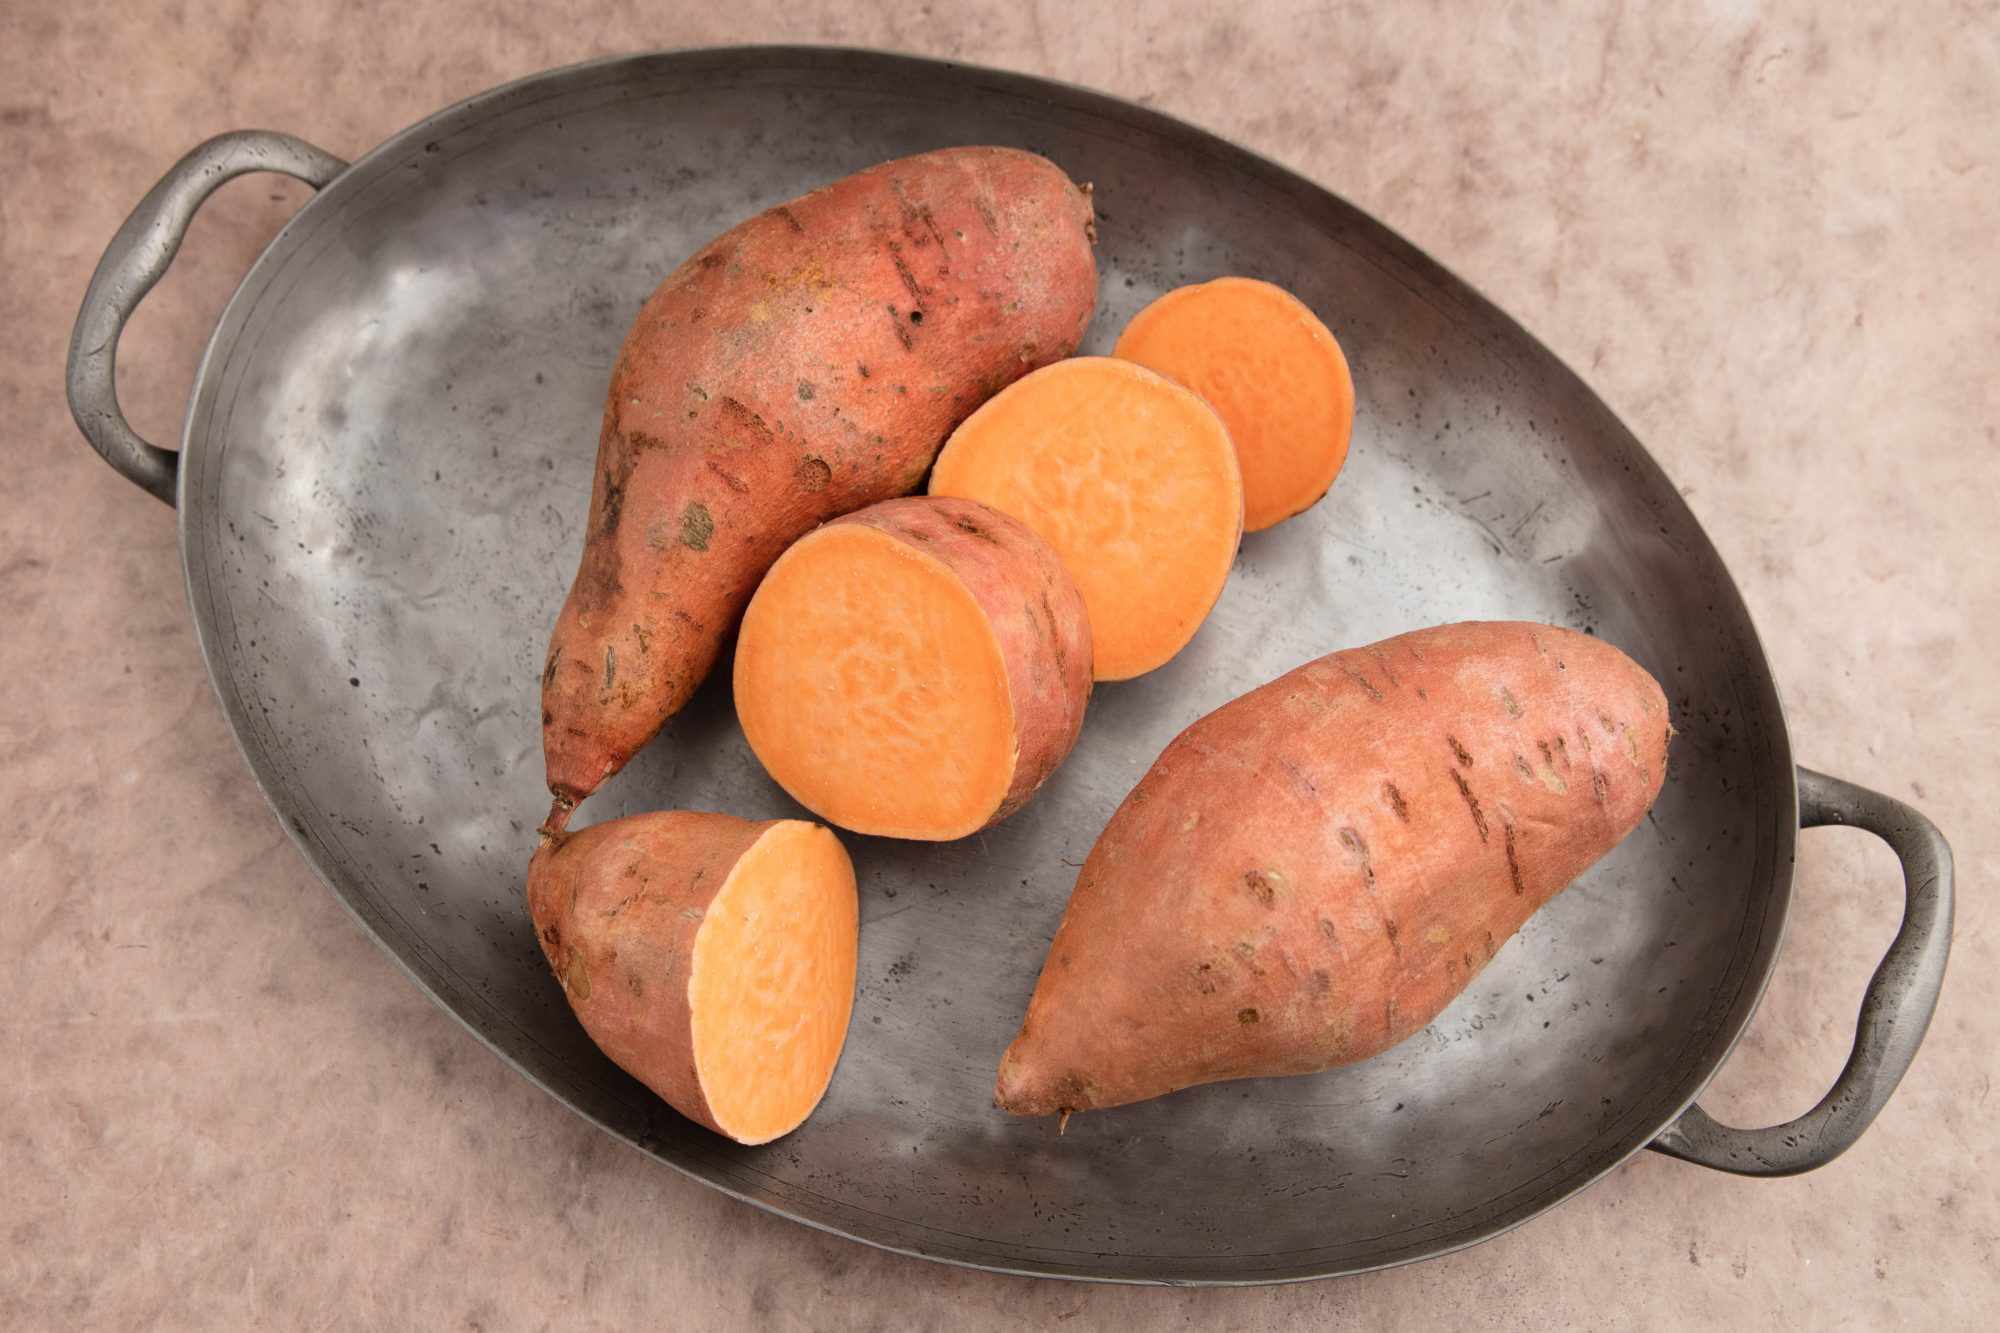 How to Select and Store Sweet Potatoes